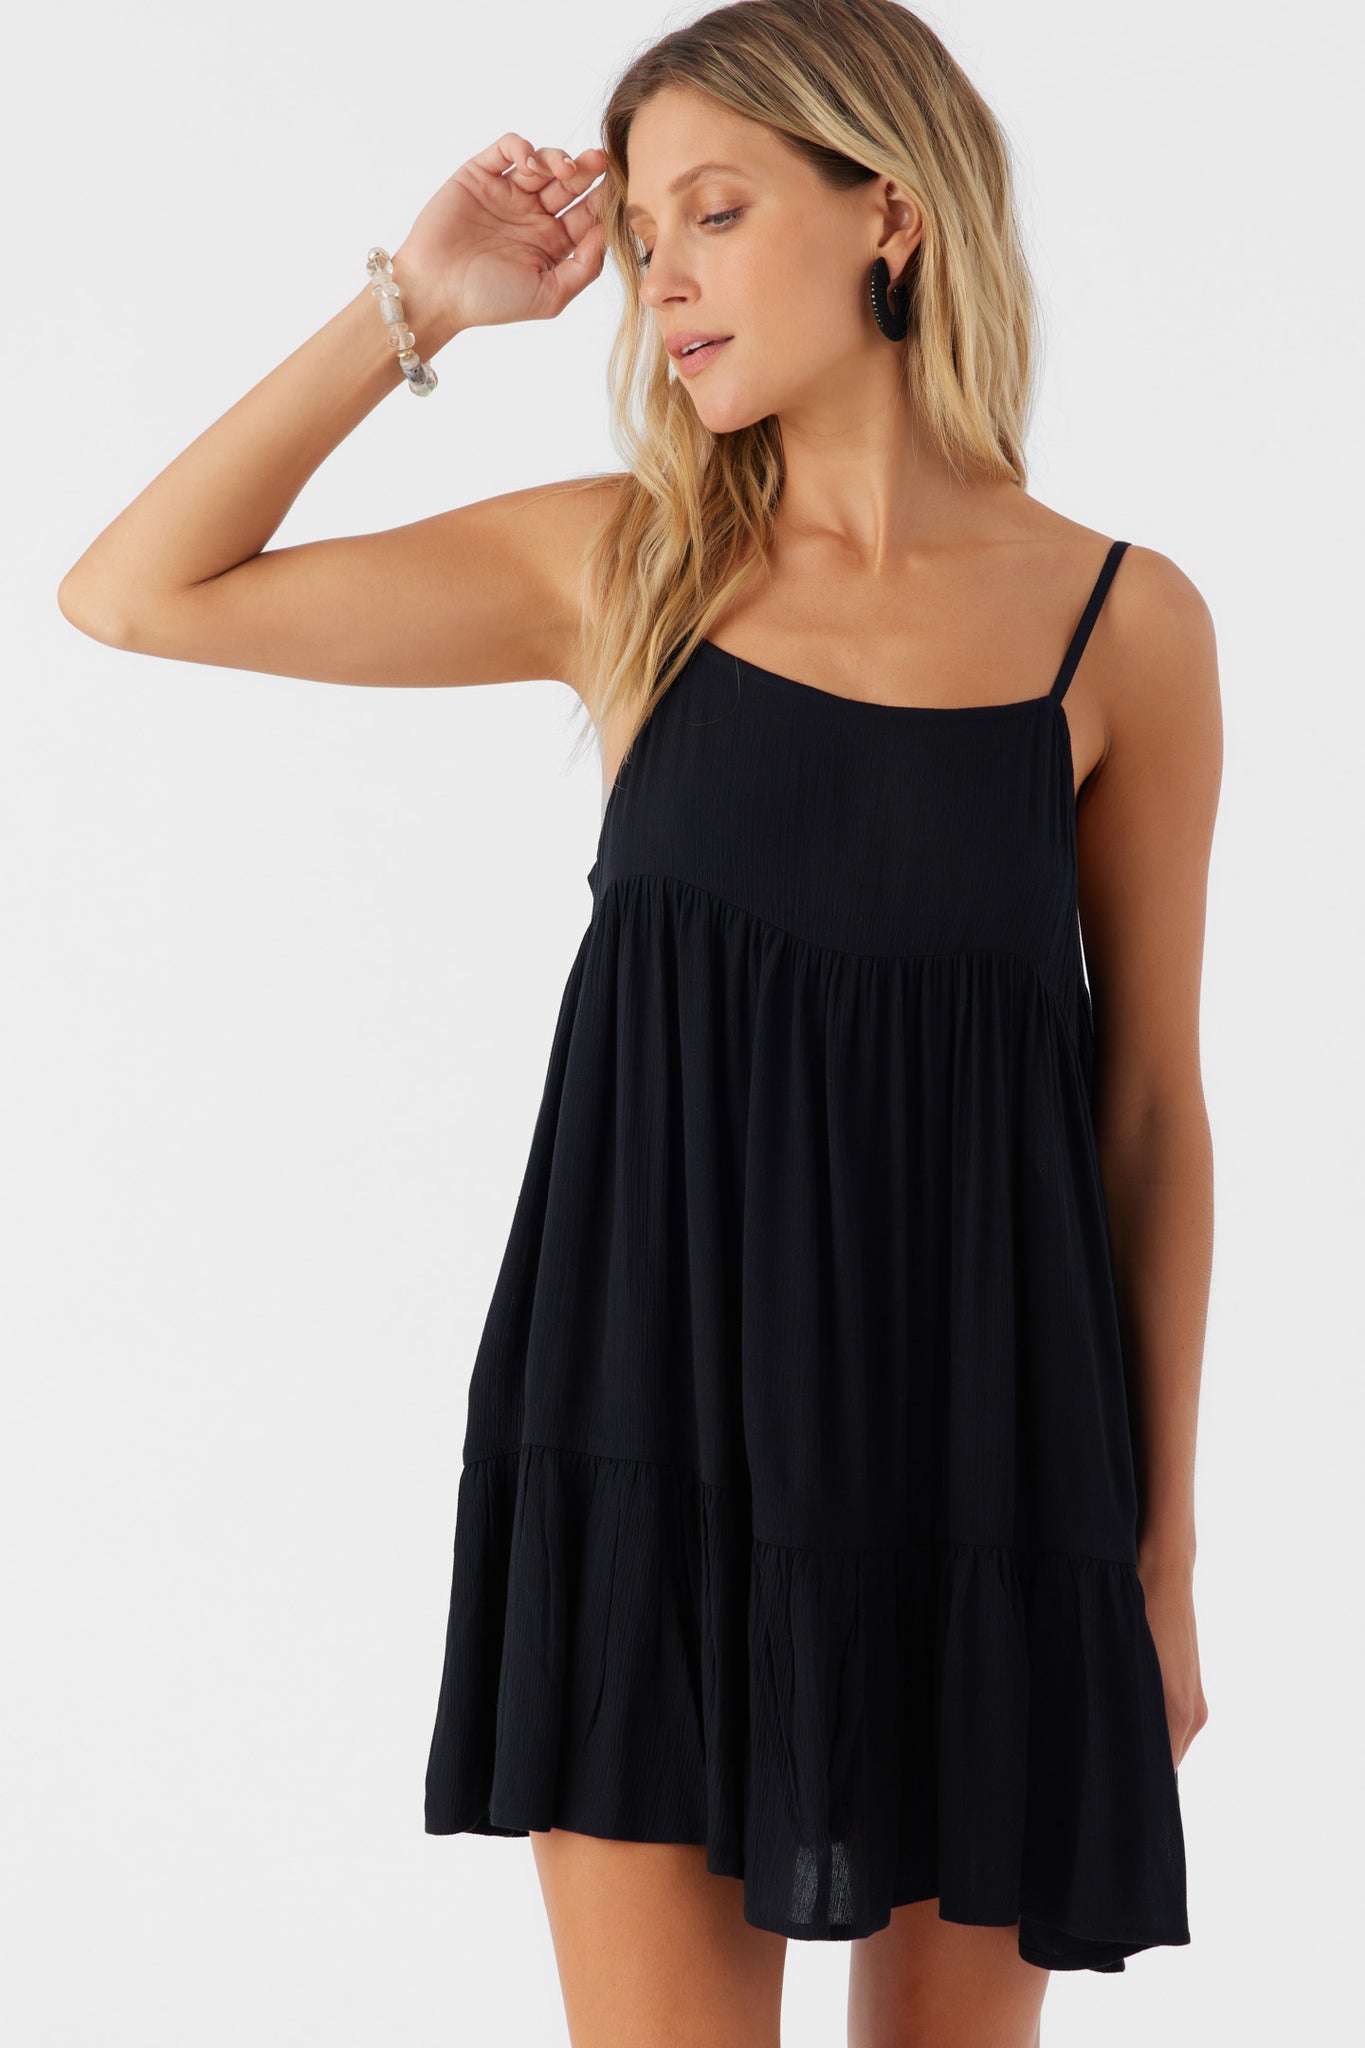 SALTWATER SOLIDS RILEE COVER-UP DRESS